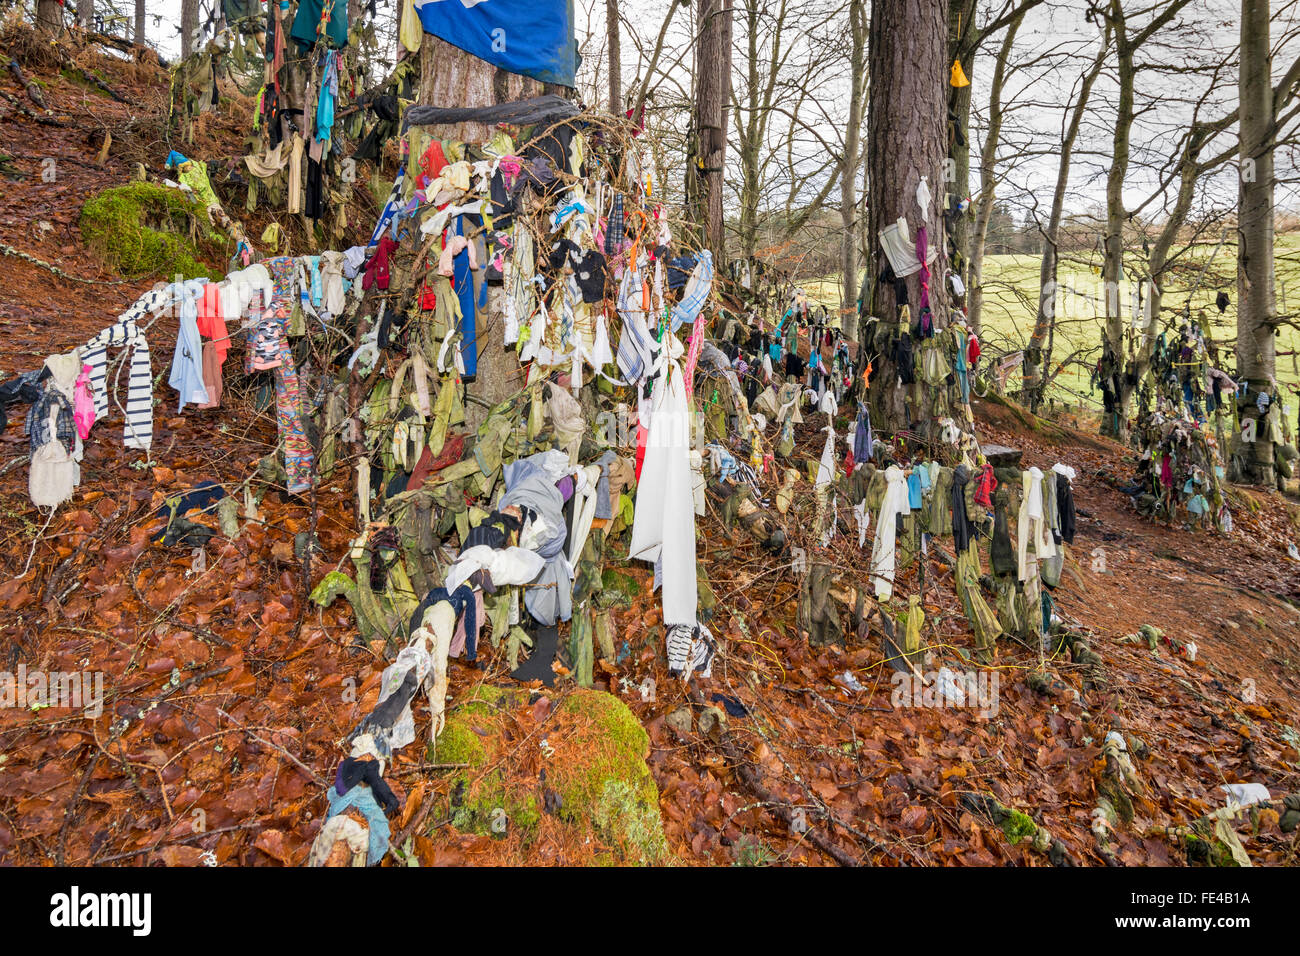 CLOOTIE WELL MUNLOCHY BLACK ISLE SCOTLAND GARMENTS AND CLOTHES ON TREES AND BRANCHES THE HILL ABOVE THE WELL Stock Photo